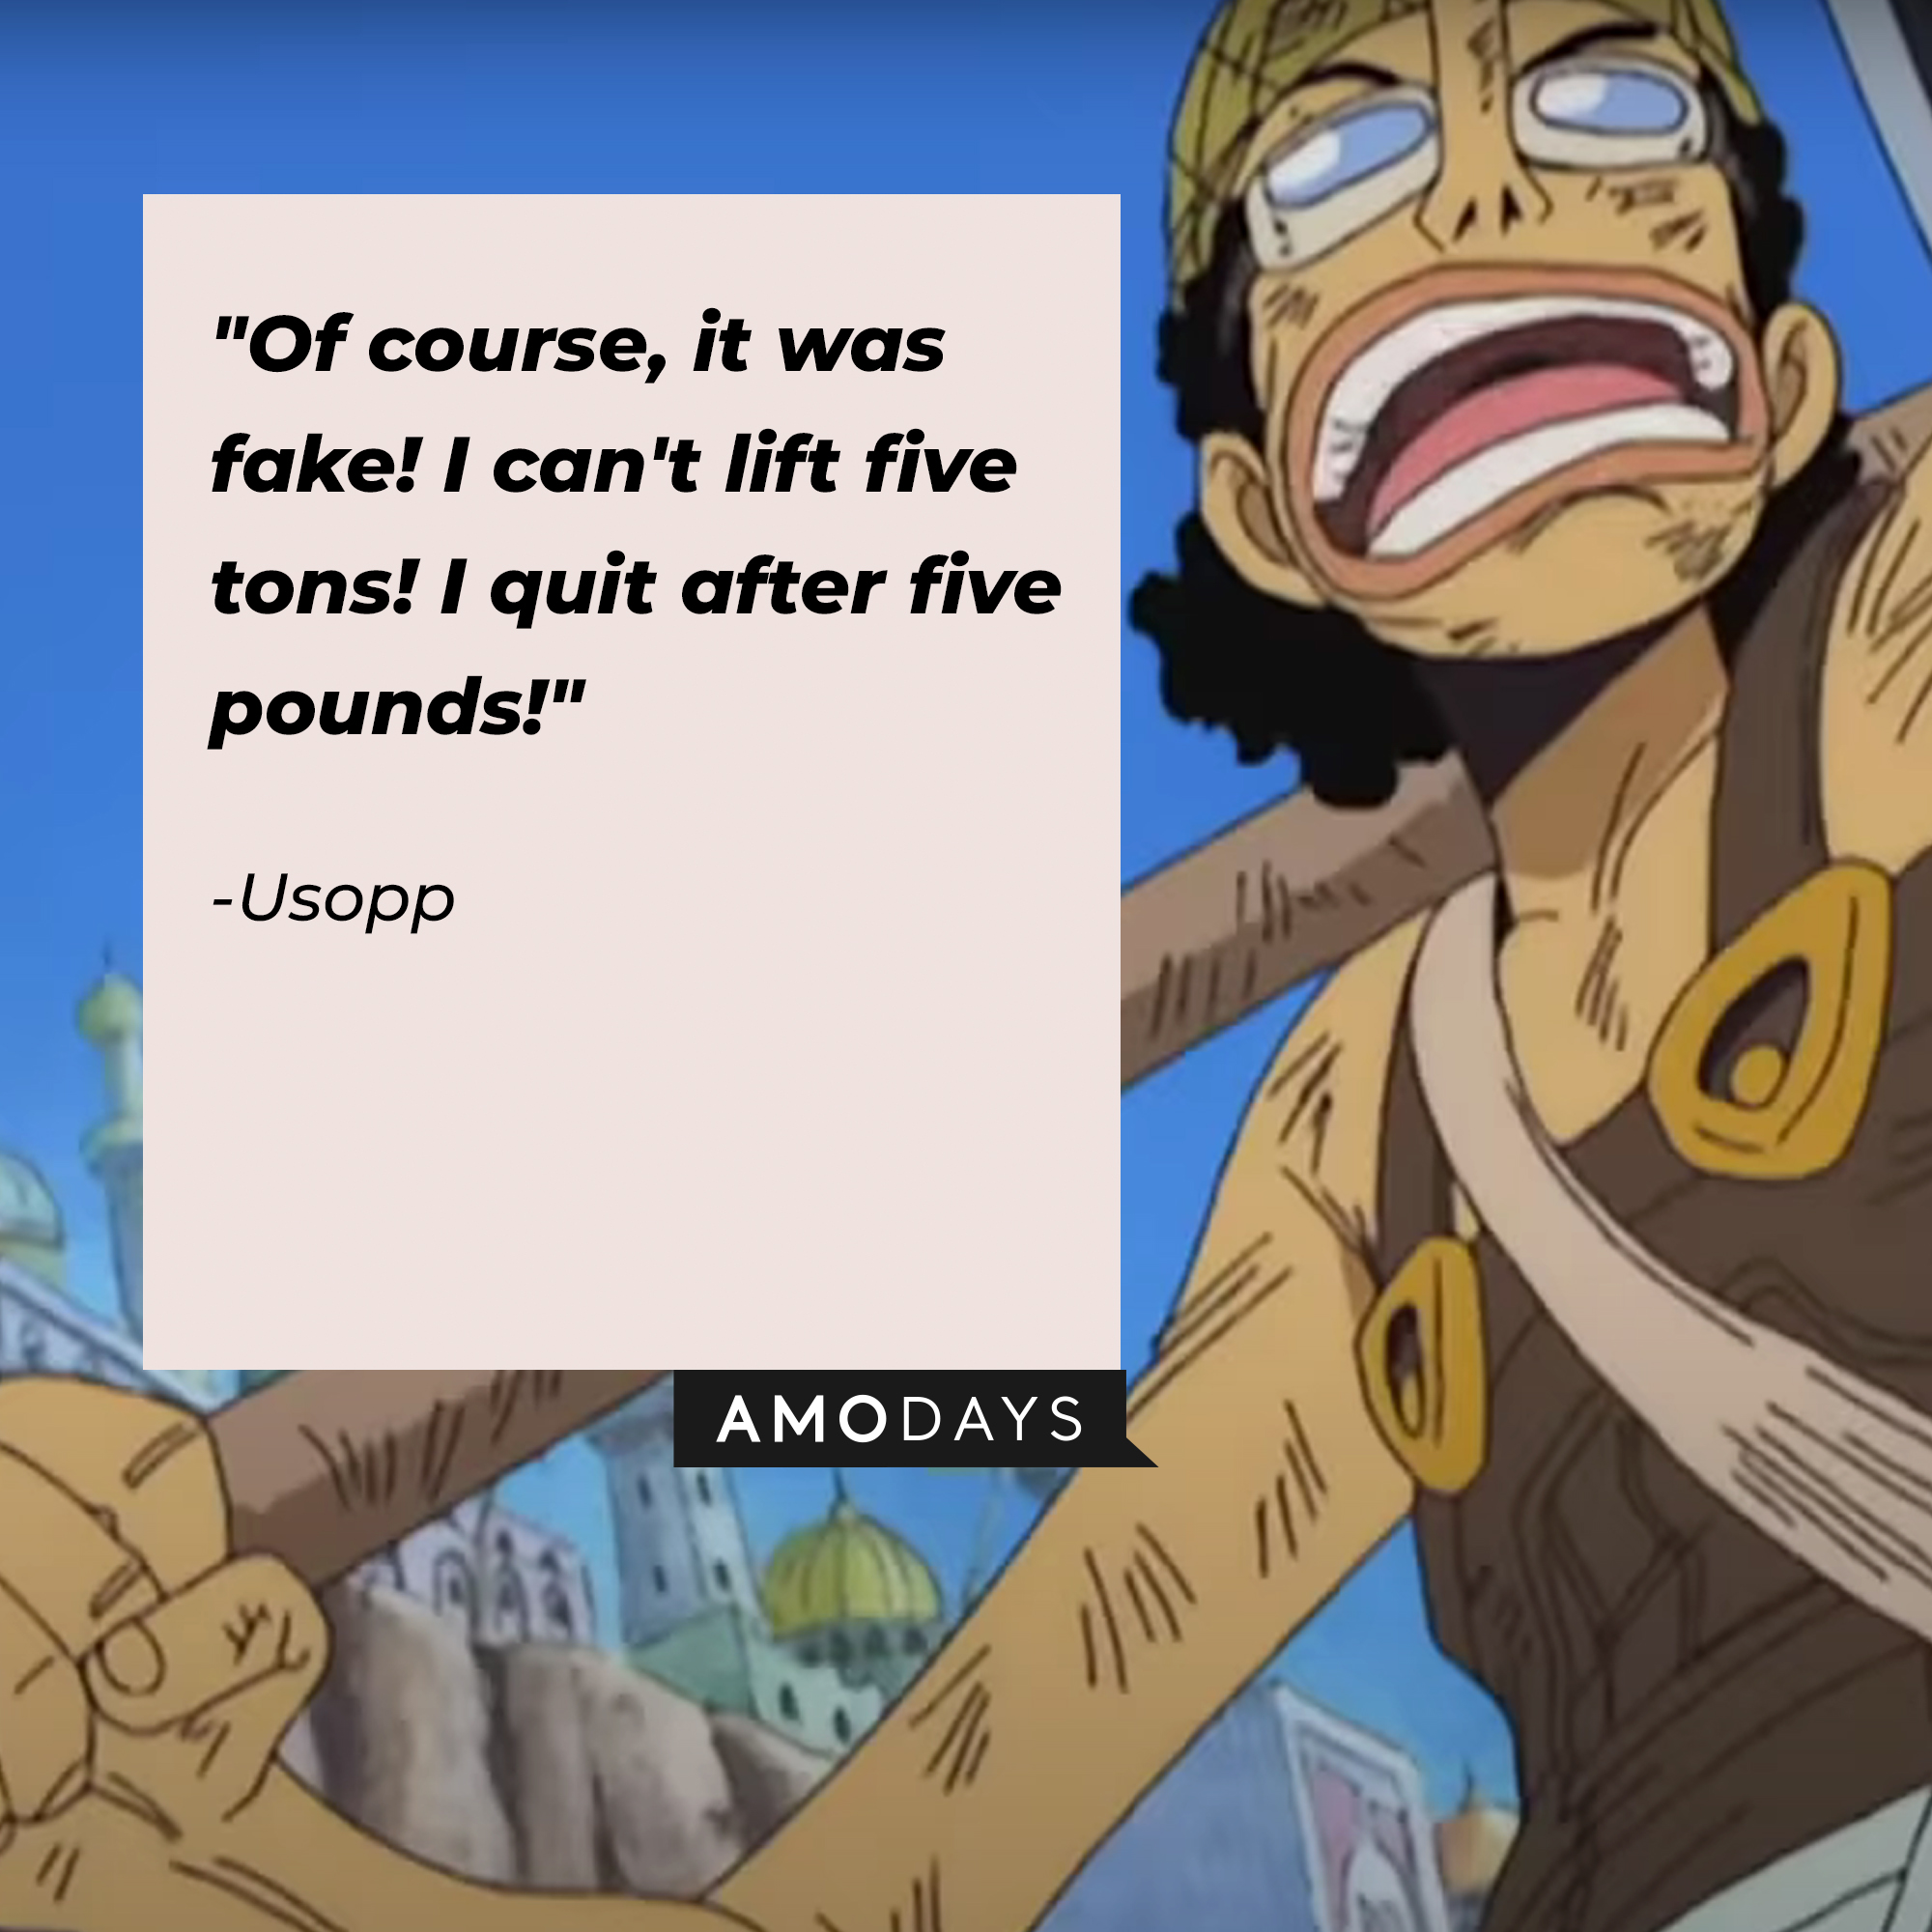 Usopp, with his quote"Of course, it was fake! I can't lift five tons! I quit after five pounds!" |  Source: facebook.com/onepieceofficial